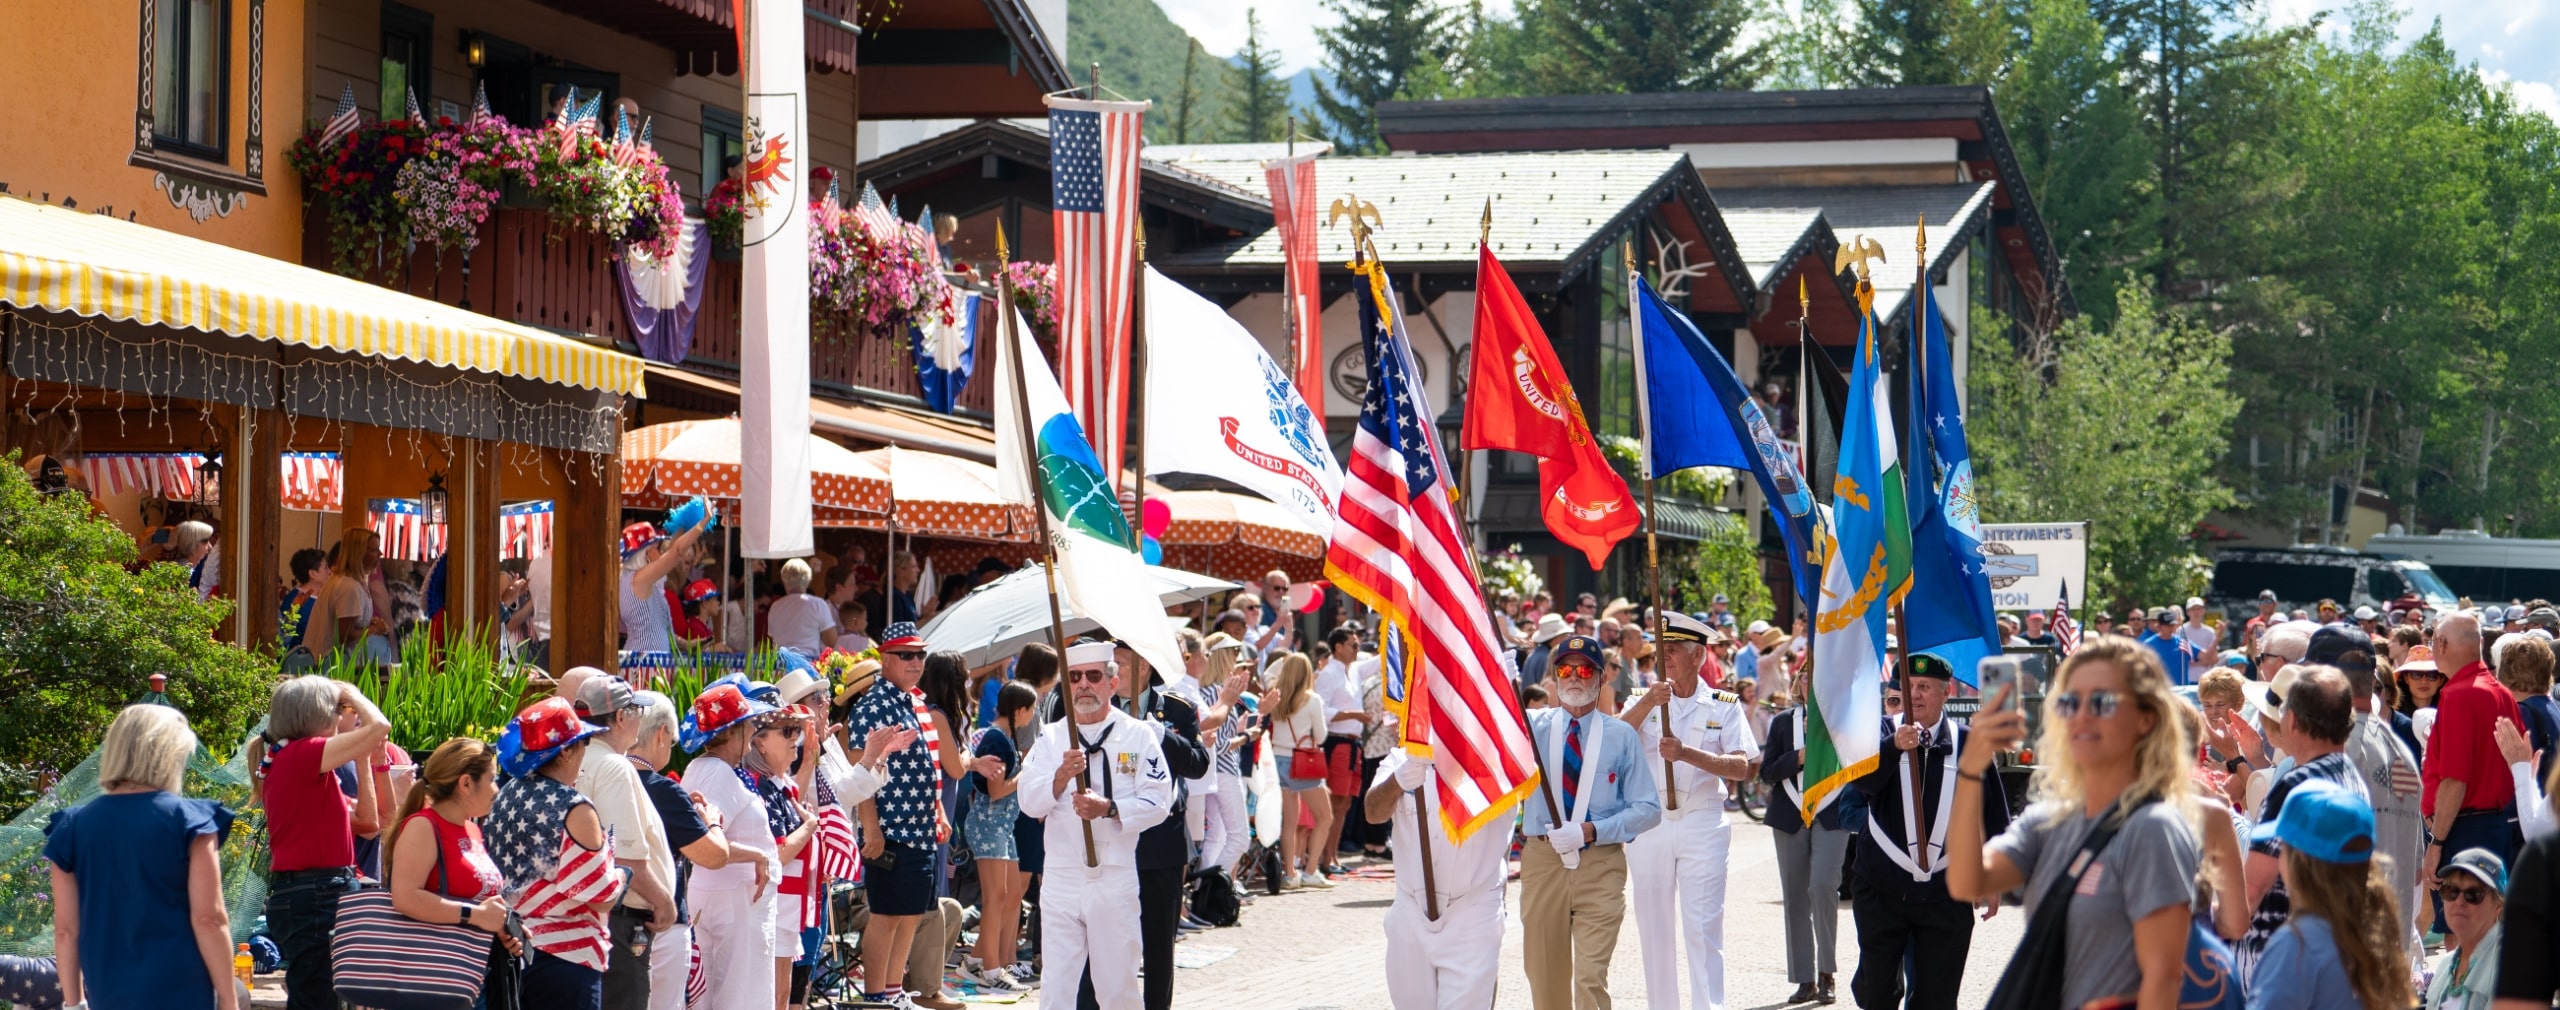 People parade through Vail Village with various flags around a crowd dressed in red, white and blue during the Fourth of July parade in Vail, Colorado.